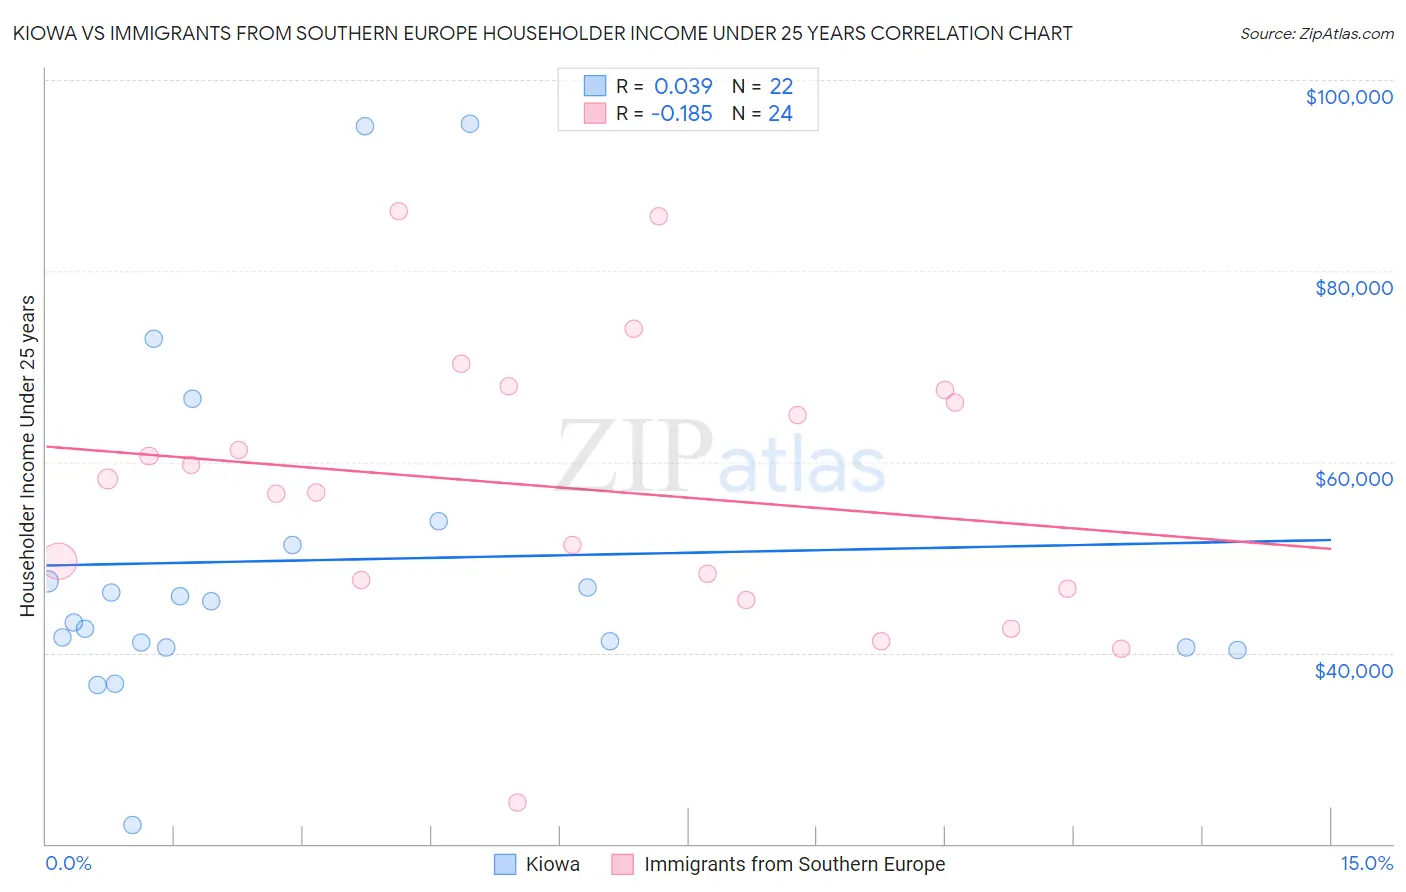 Kiowa vs Immigrants from Southern Europe Householder Income Under 25 years